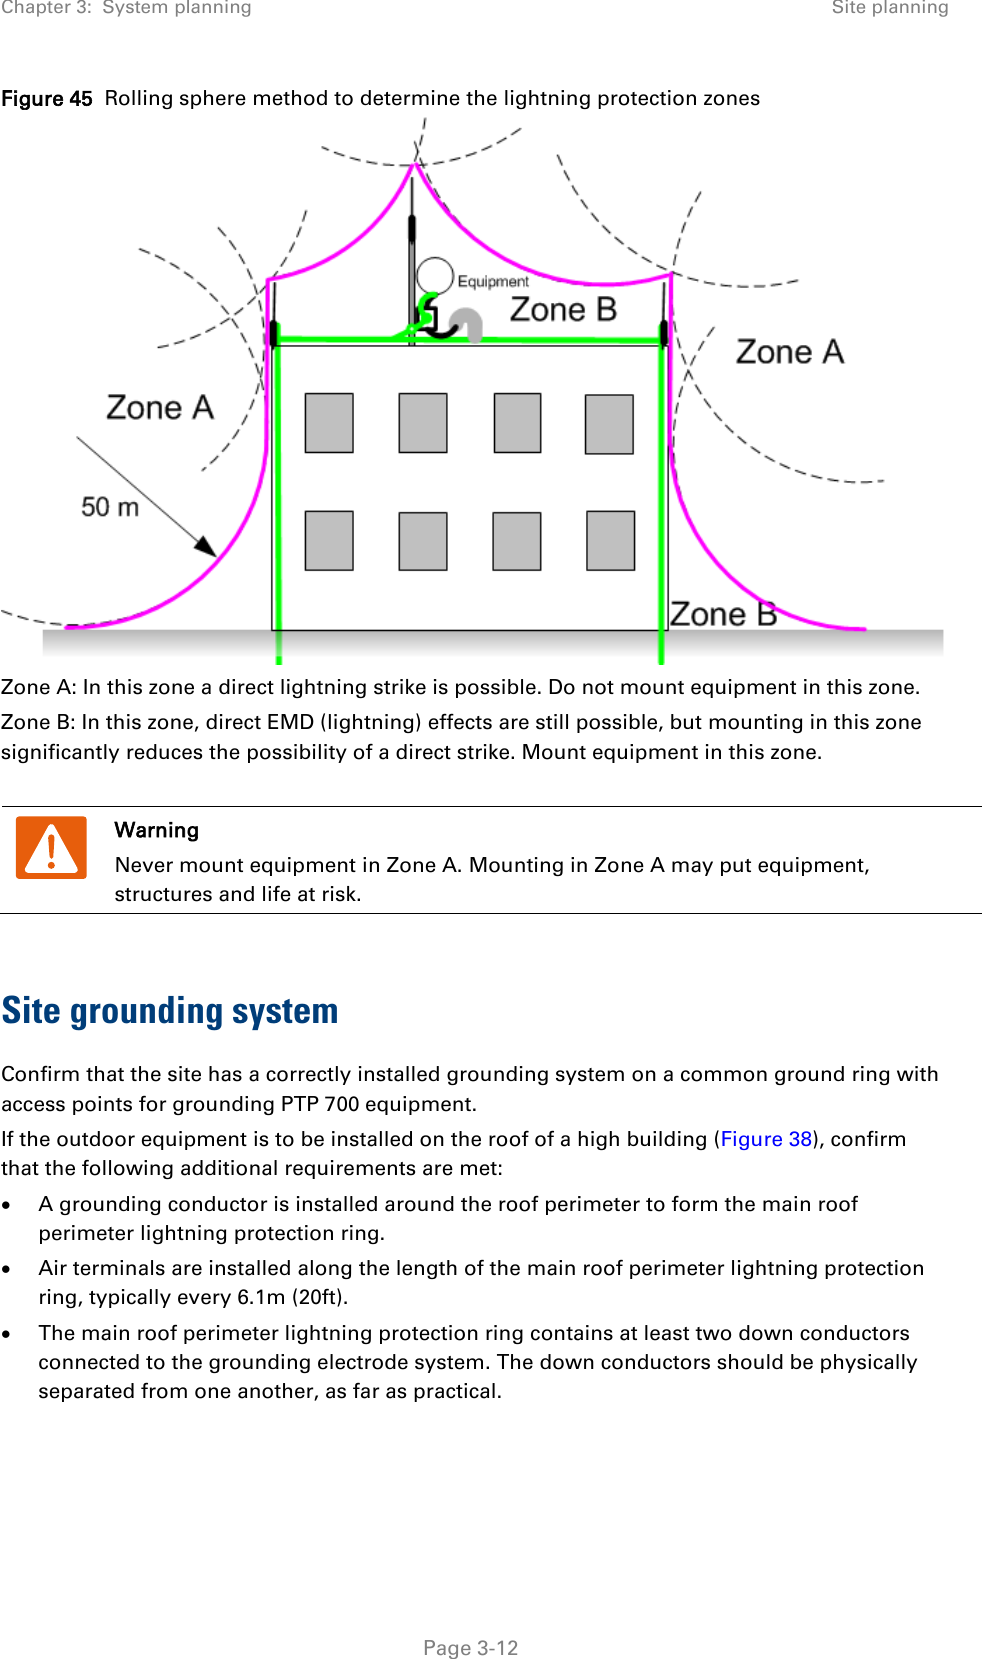 Chapter 3:  System planning Site planning  Figure 45  Rolling sphere method to determine the lightning protection zones  Zone A: In this zone a direct lightning strike is possible. Do not mount equipment in this zone. Zone B: In this zone, direct EMD (lightning) effects are still possible, but mounting in this zone significantly reduces the possibility of a direct strike. Mount equipment in this zone.   Warning Never mount equipment in Zone A. Mounting in Zone A may put equipment, structures and life at risk.  Site grounding system Confirm that the site has a correctly installed grounding system on a common ground ring with access points for grounding PTP 700 equipment. If the outdoor equipment is to be installed on the roof of a high building (Figure 38), confirm that the following additional requirements are met: • A grounding conductor is installed around the roof perimeter to form the main roof perimeter lightning protection ring. • Air terminals are installed along the length of the main roof perimeter lightning protection ring, typically every 6.1m (20ft). • The main roof perimeter lightning protection ring contains at least two down conductors connected to the grounding electrode system. The down conductors should be physically separated from one another, as far as practical.  Page 3-12 